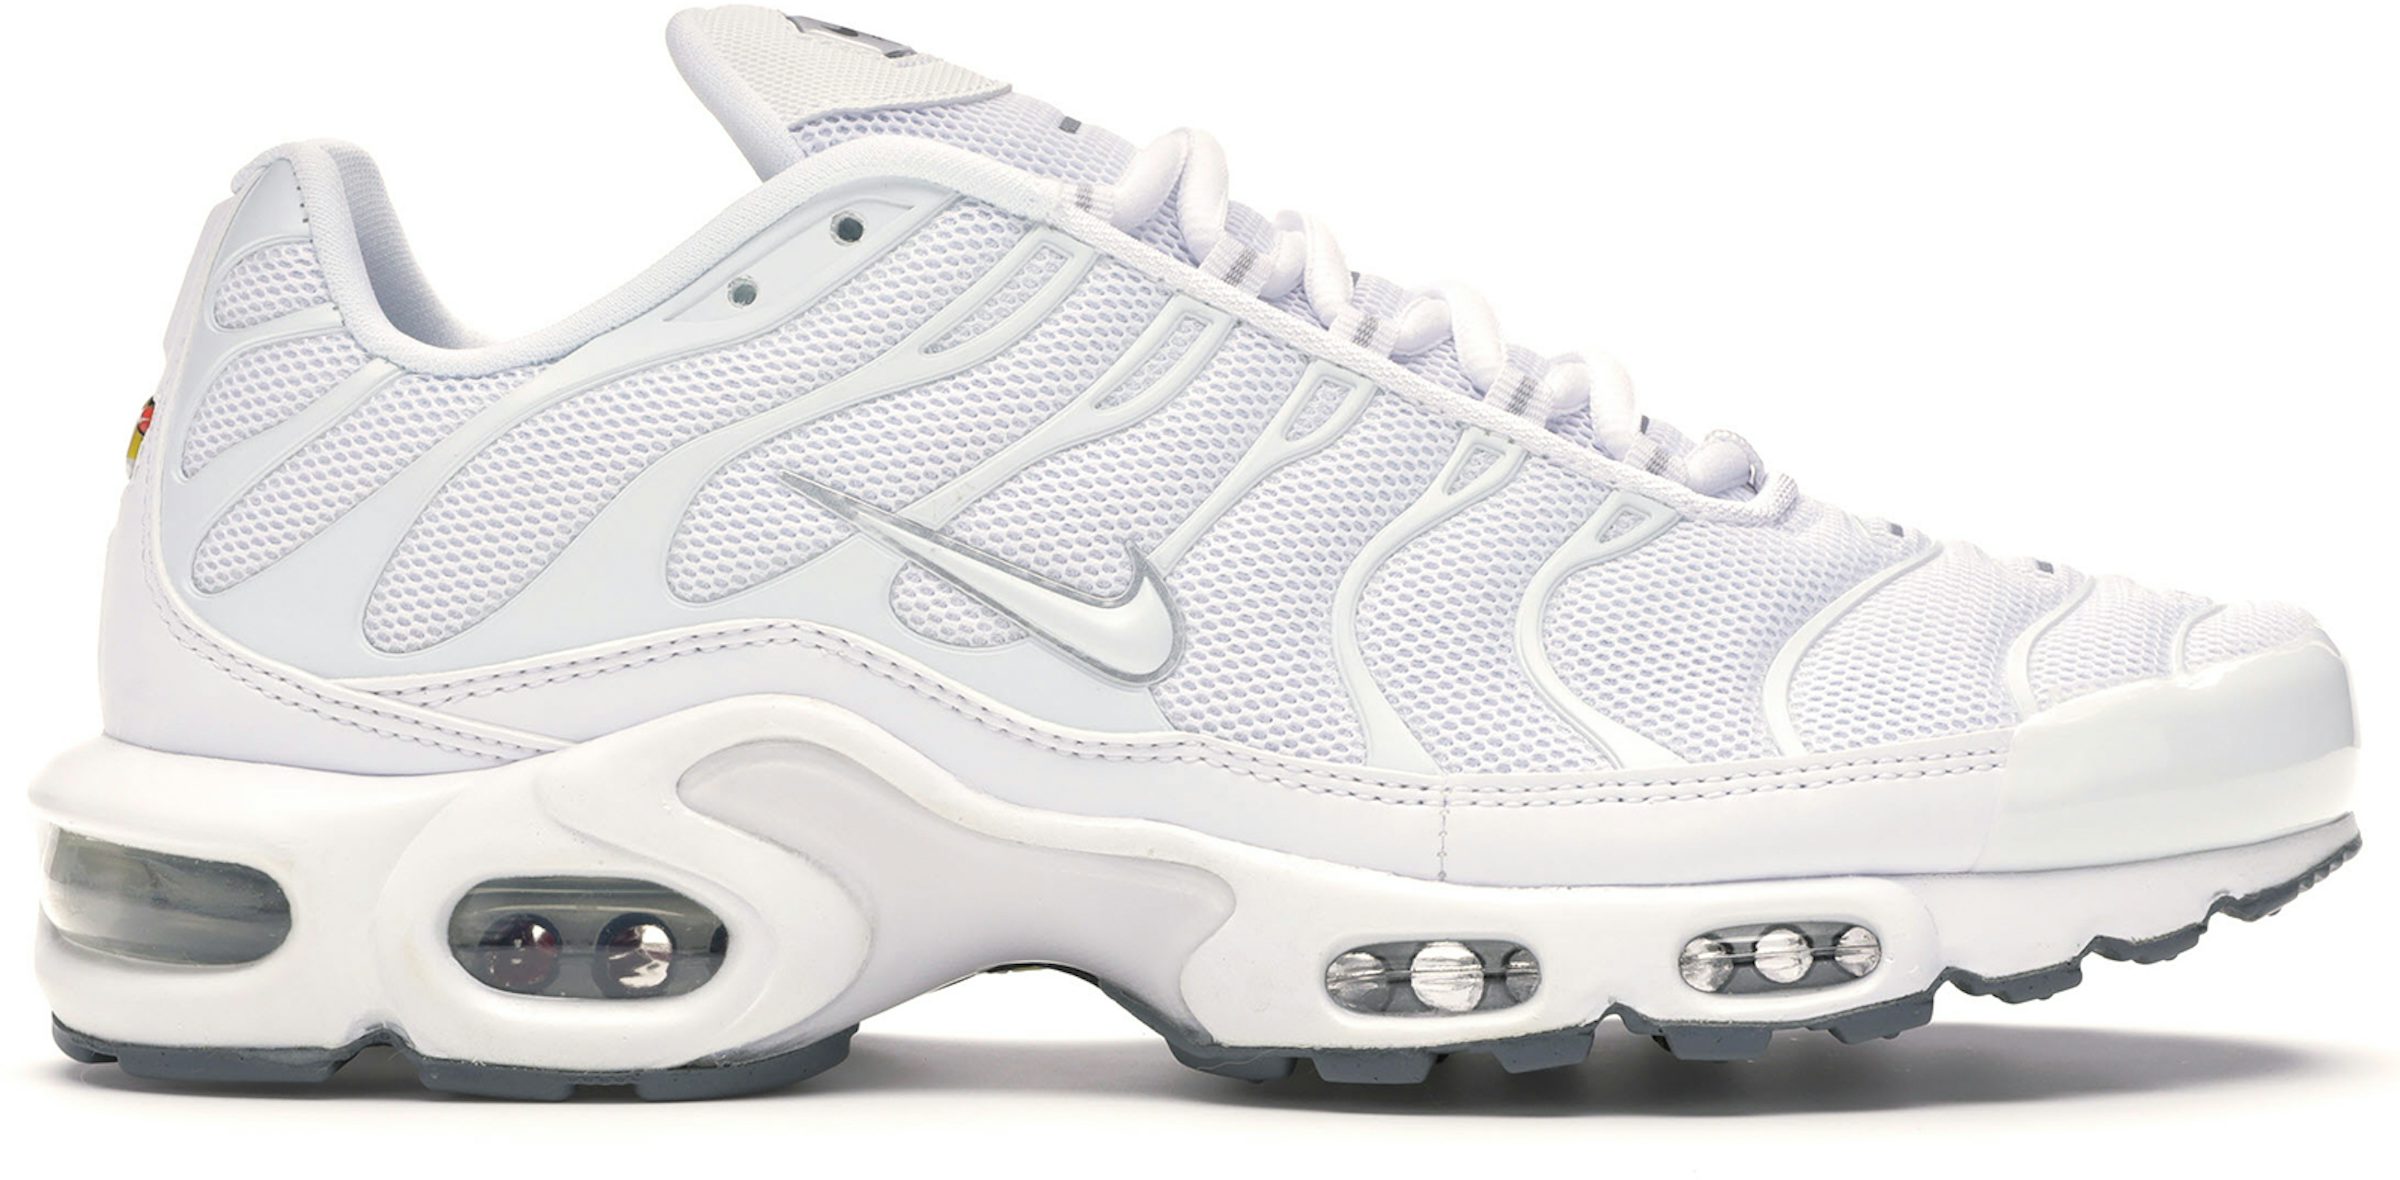 New NIKE Air Max Plus TN classic Men's Athletic Sneakers white all sizes